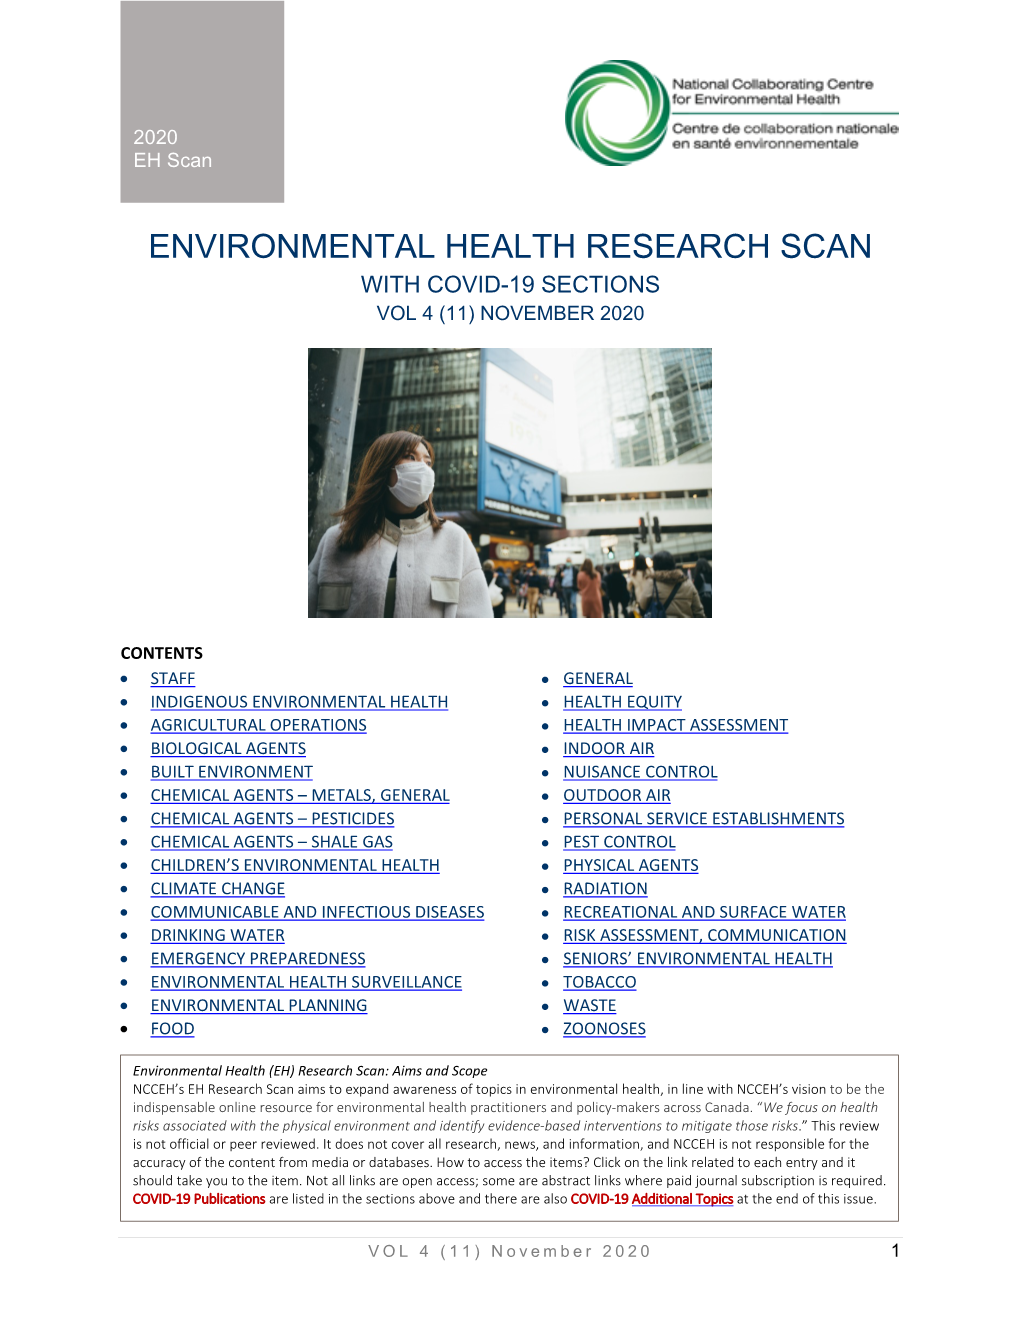 NCCEH Research Scan -202011 with COVID-19.Pdf